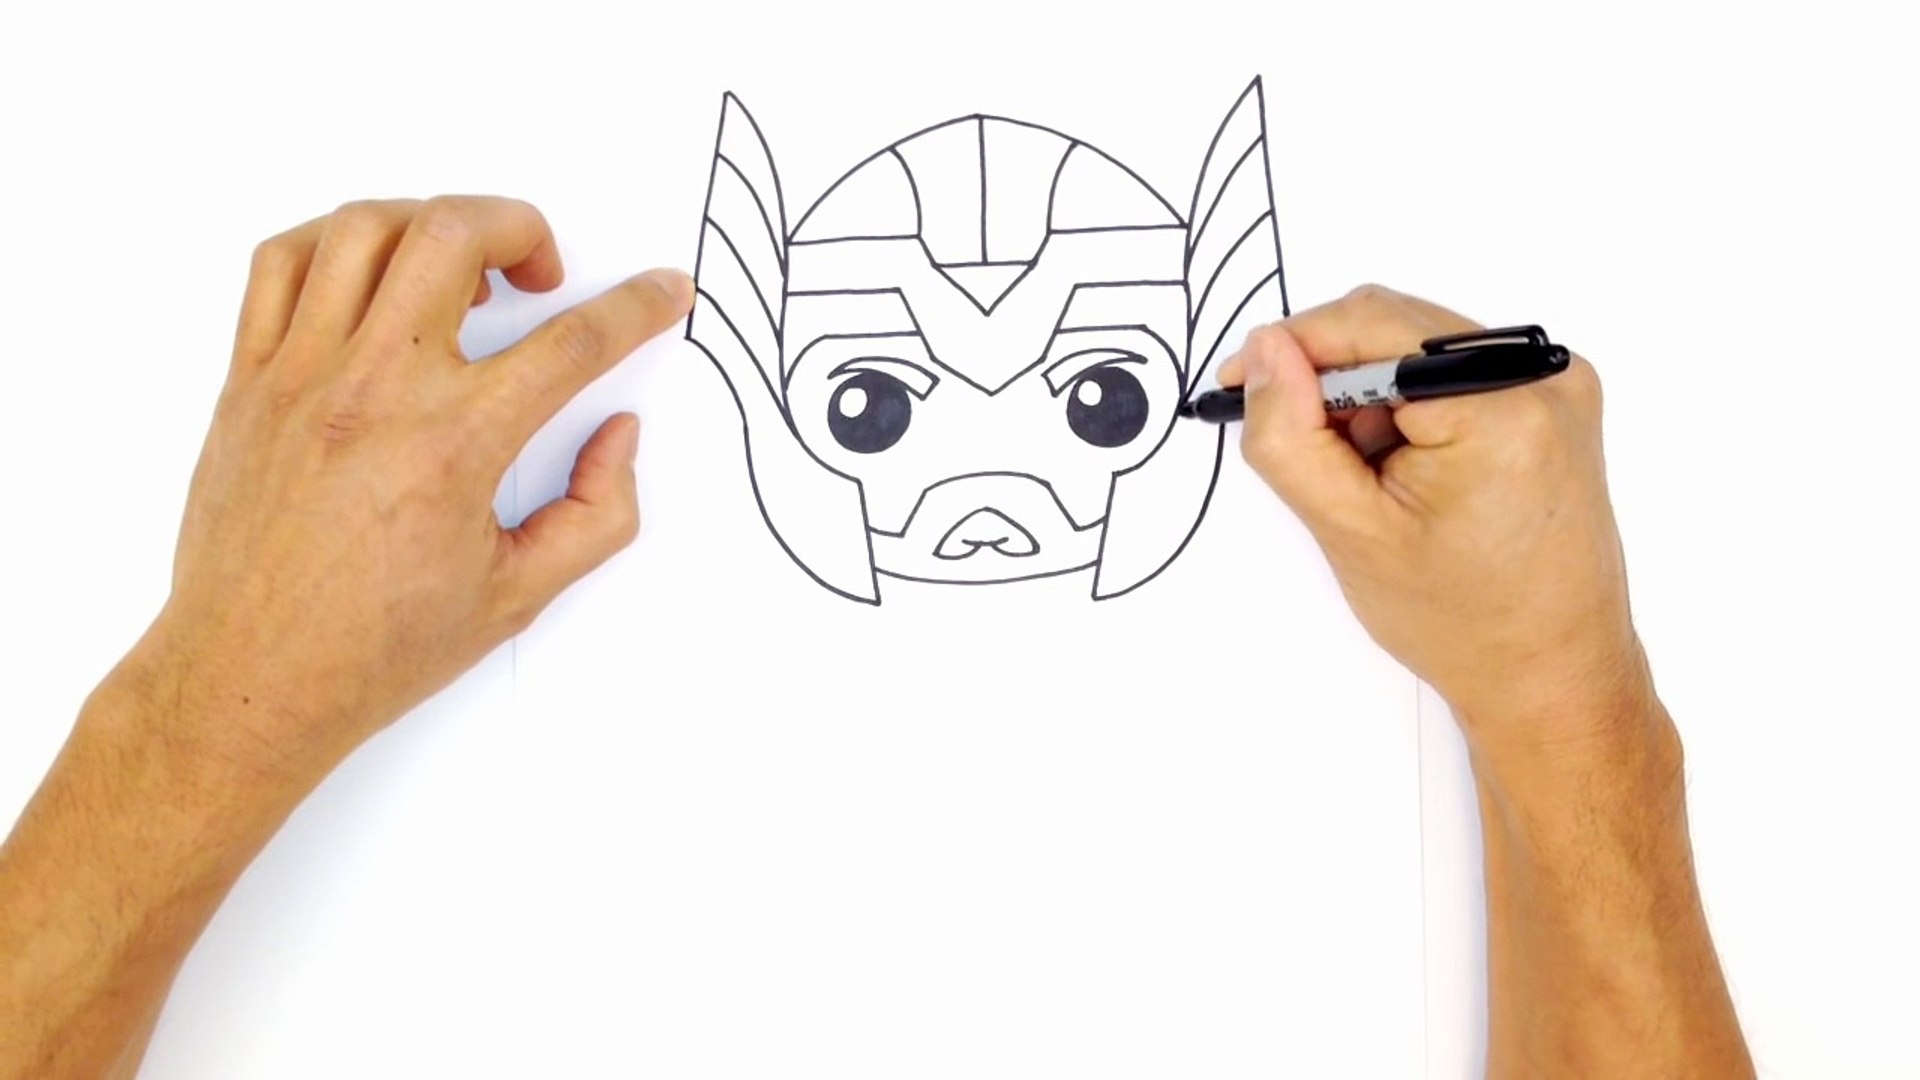 how to draw thor from avengers